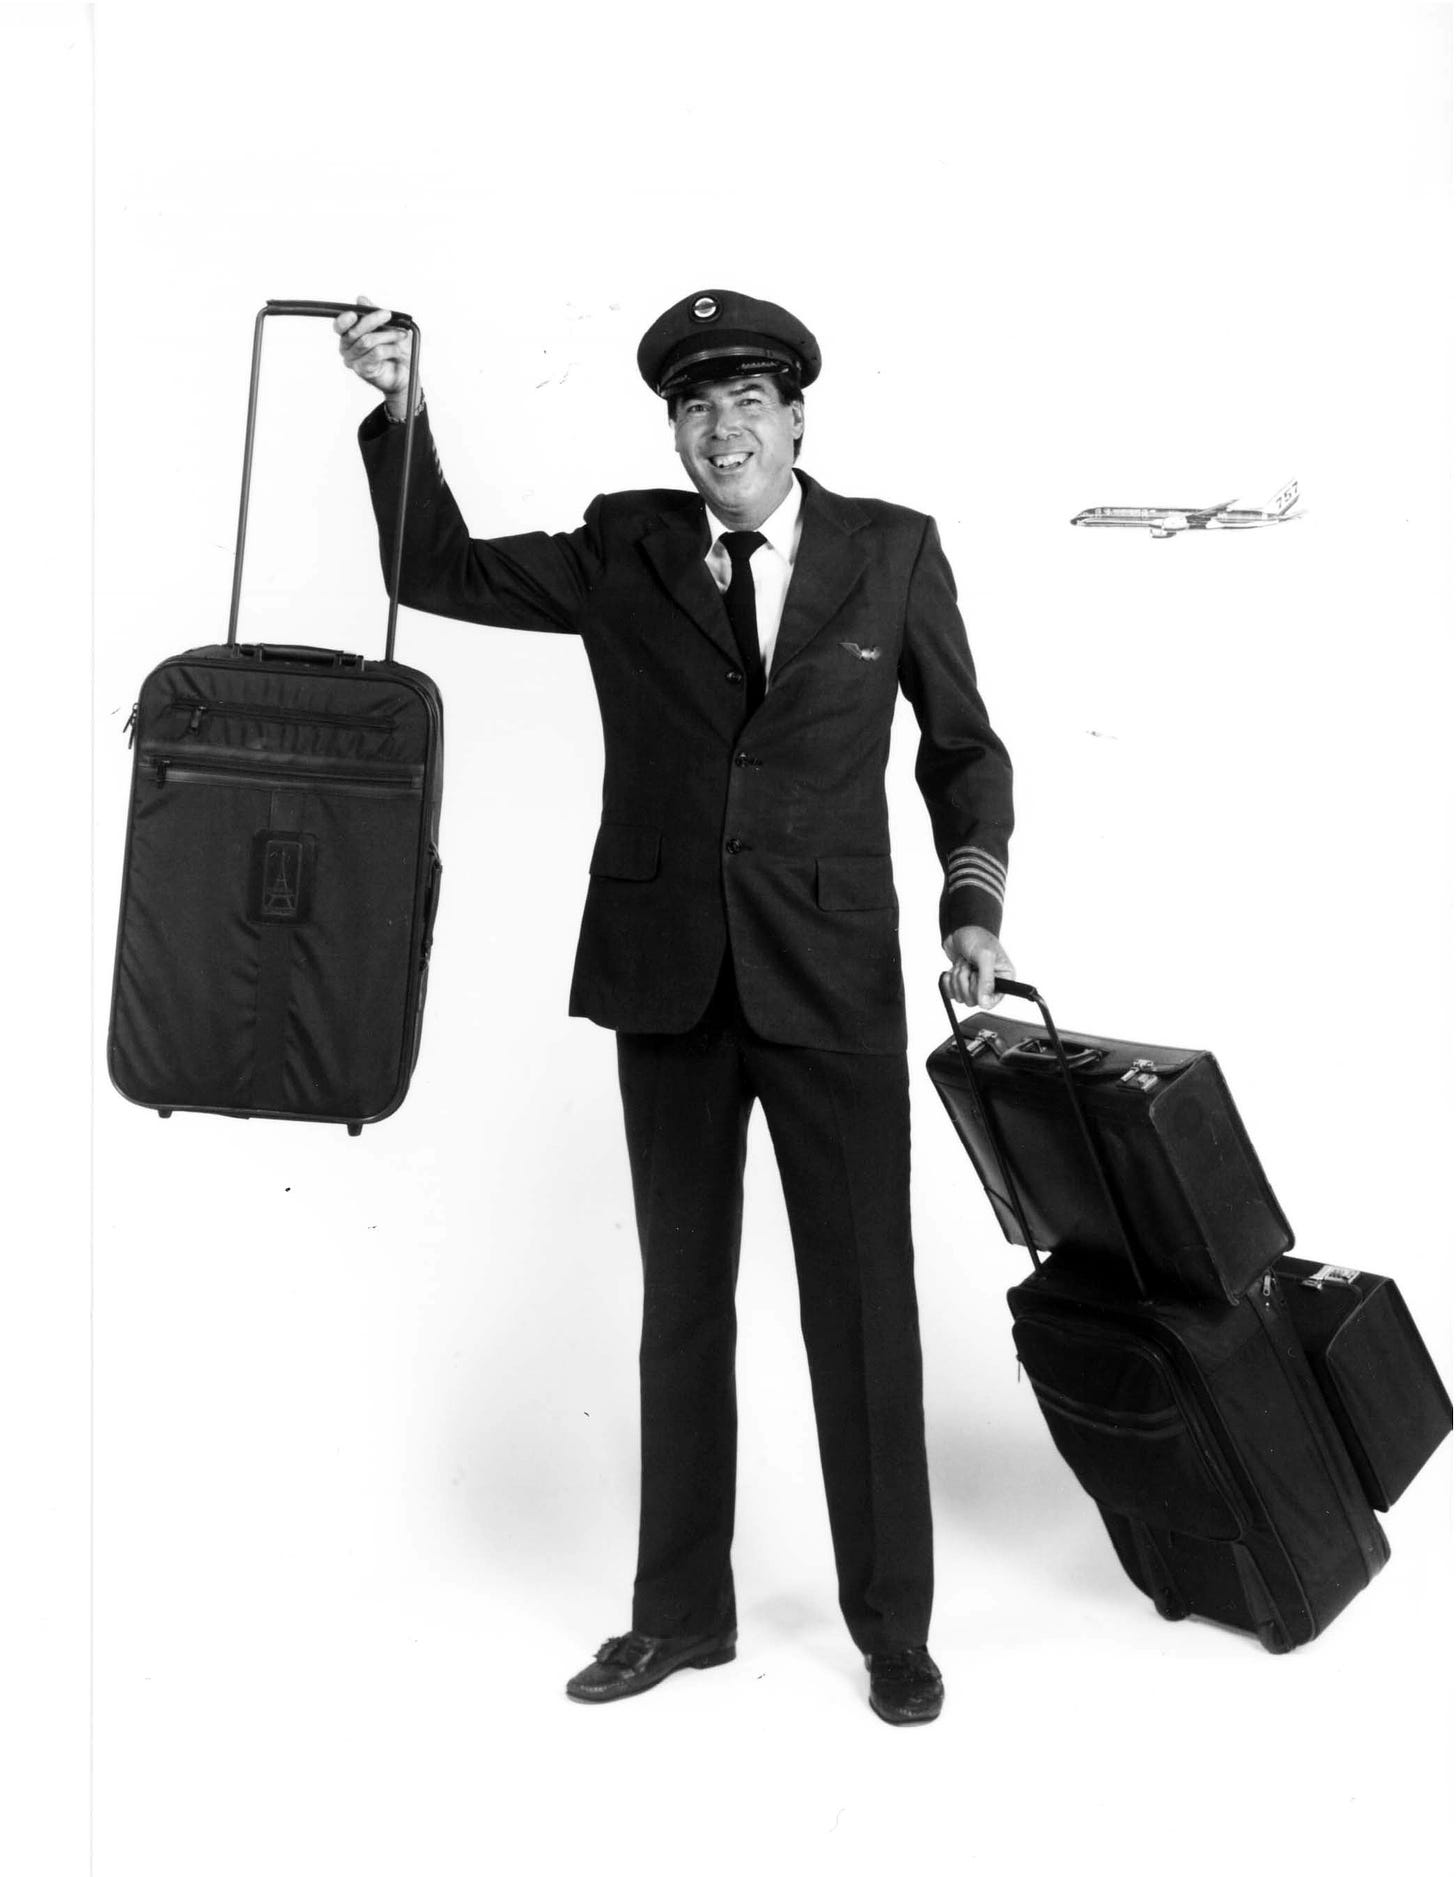 Robert Plath and Rollaboard Luggage